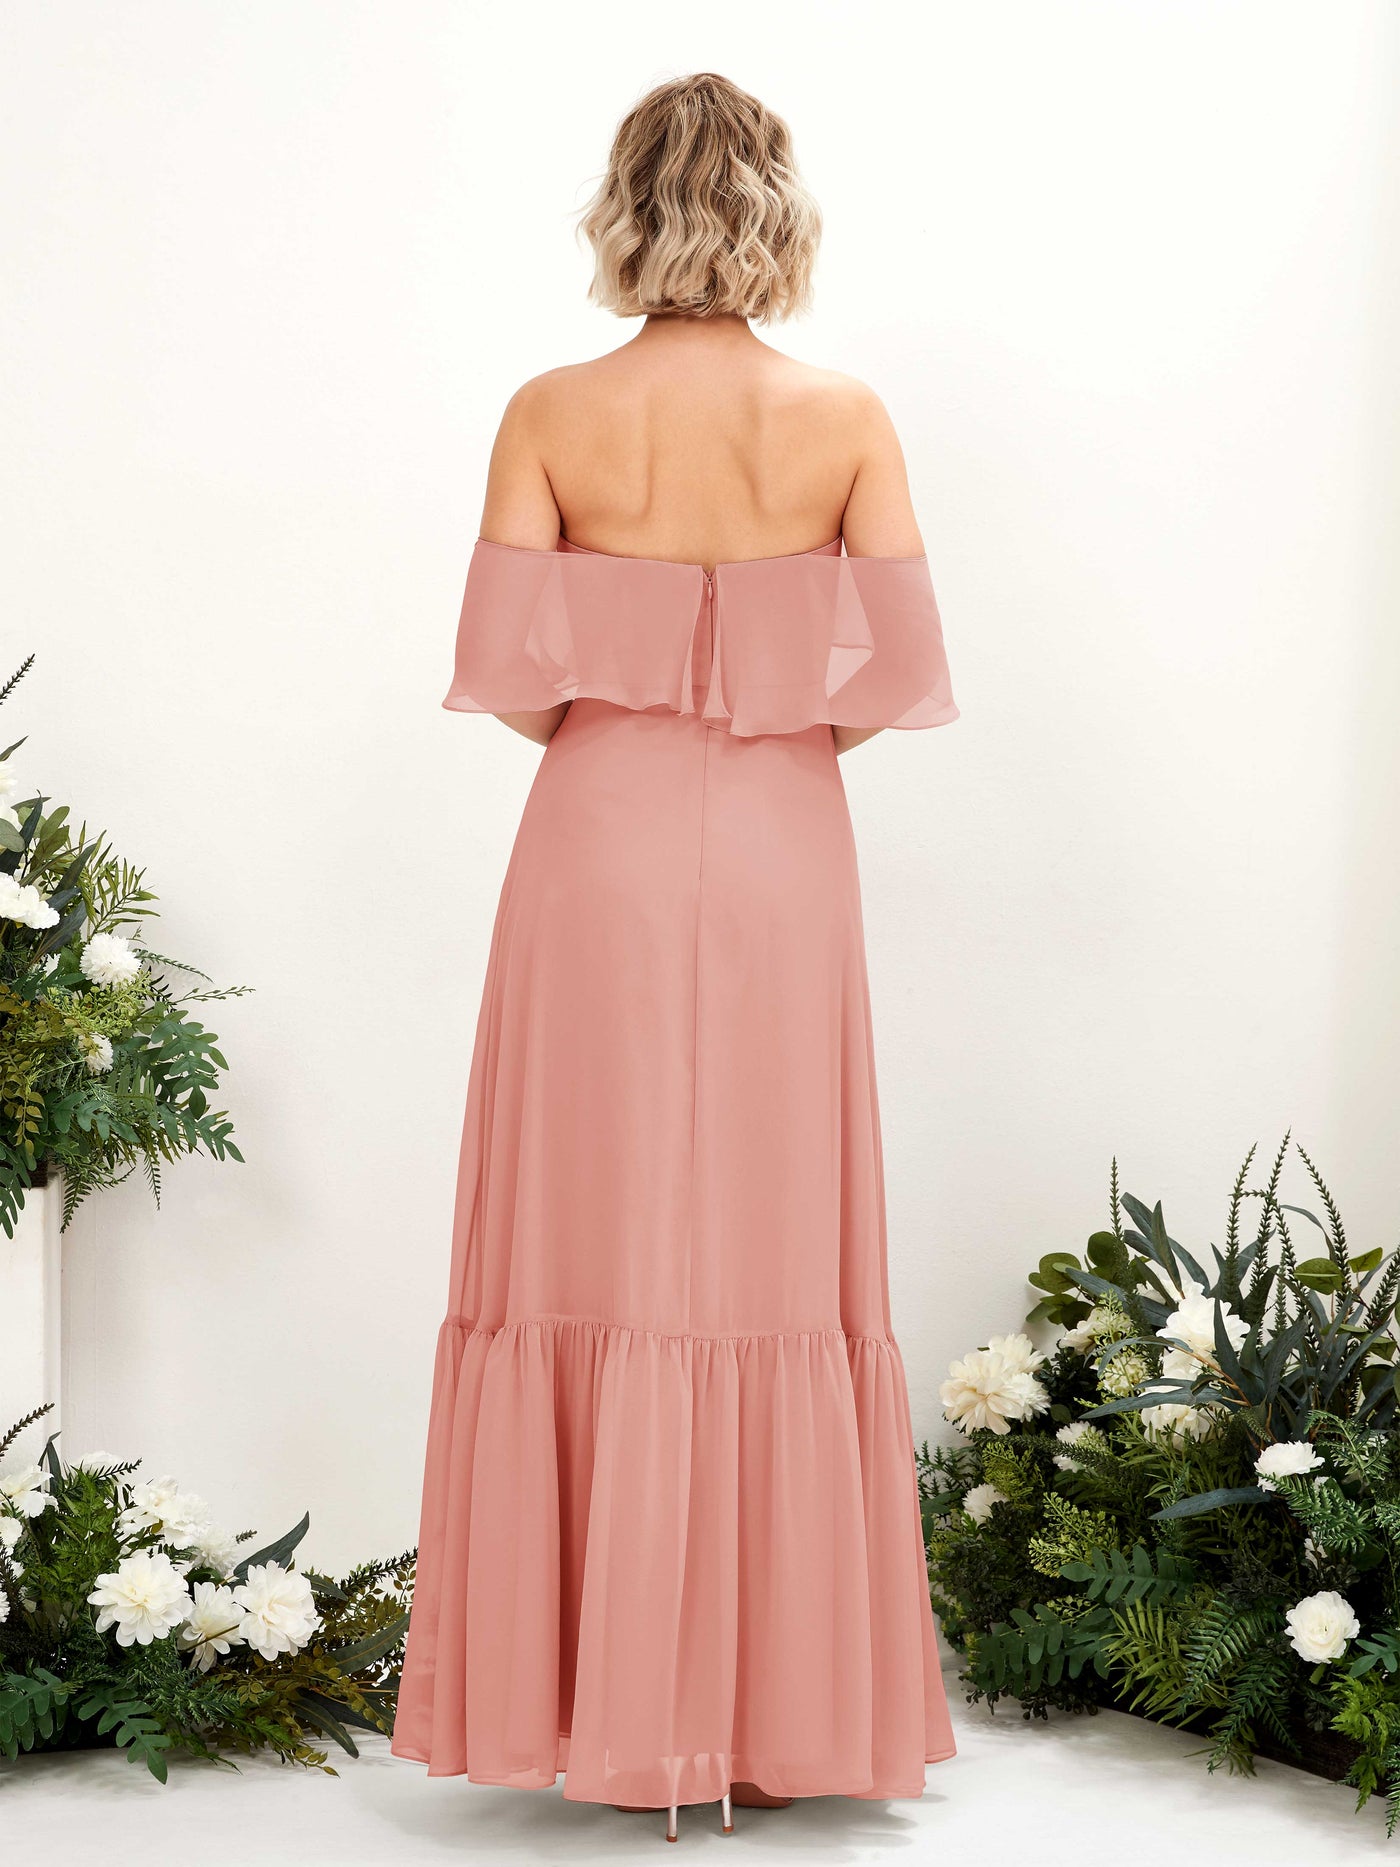 Champagne Rose Bridesmaid Dresses Bridesmaid Dress A-line Chiffon Off Shoulder Full Length Sleeveless Wedding Party Dress (81224506)#color_champagne-rose